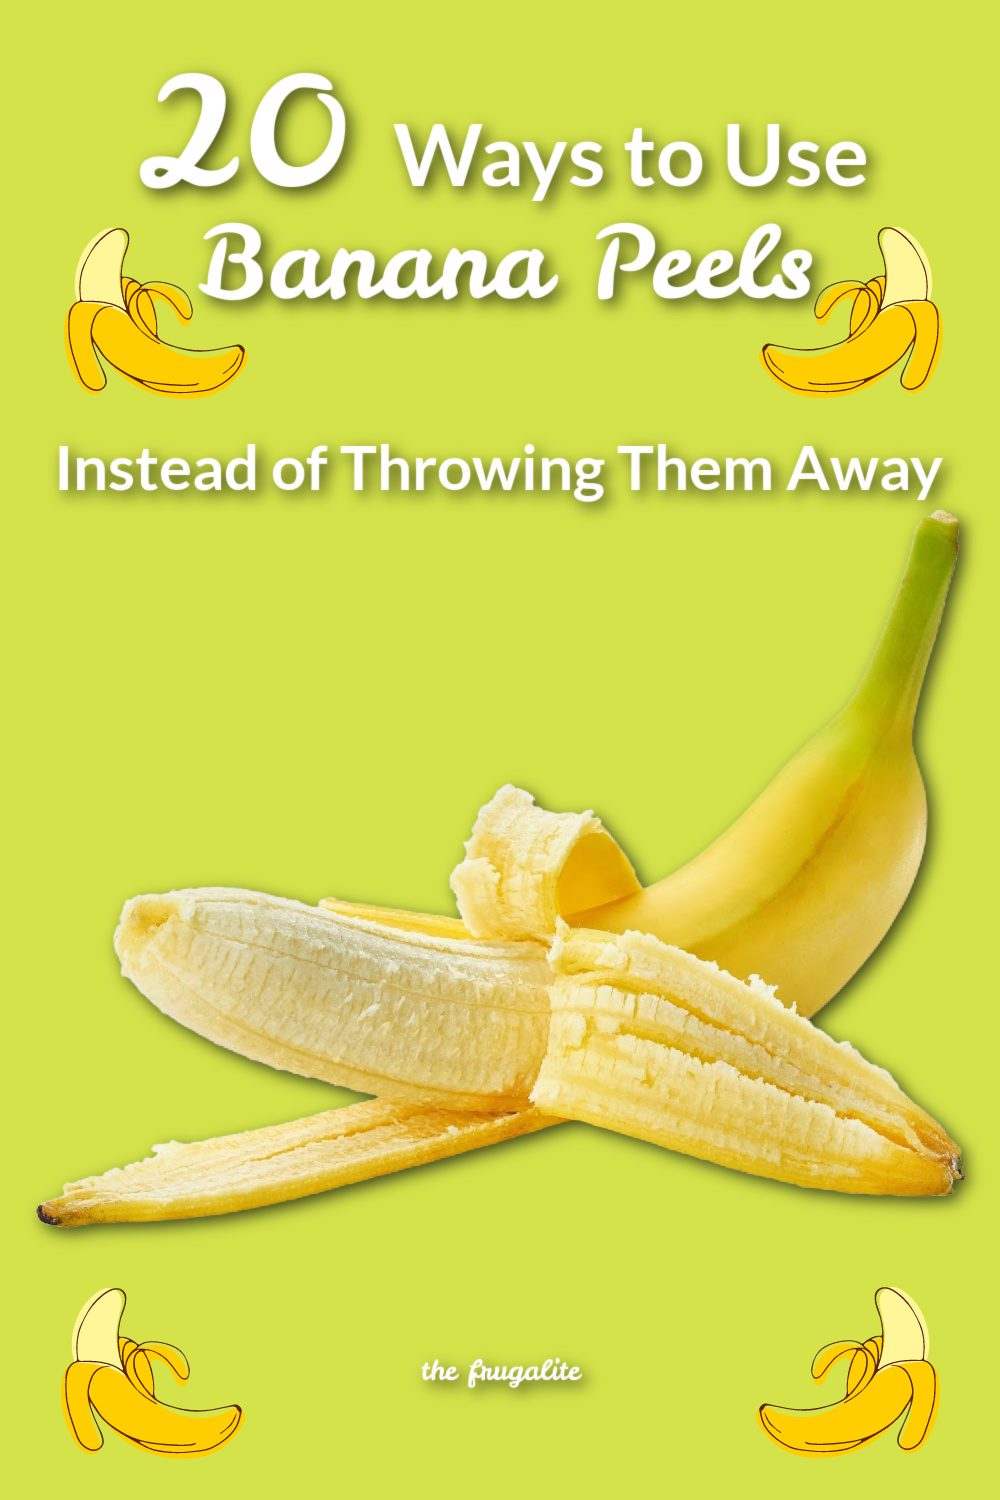 20 Ways to Use Banana Peels Instead of Throwing Them Away